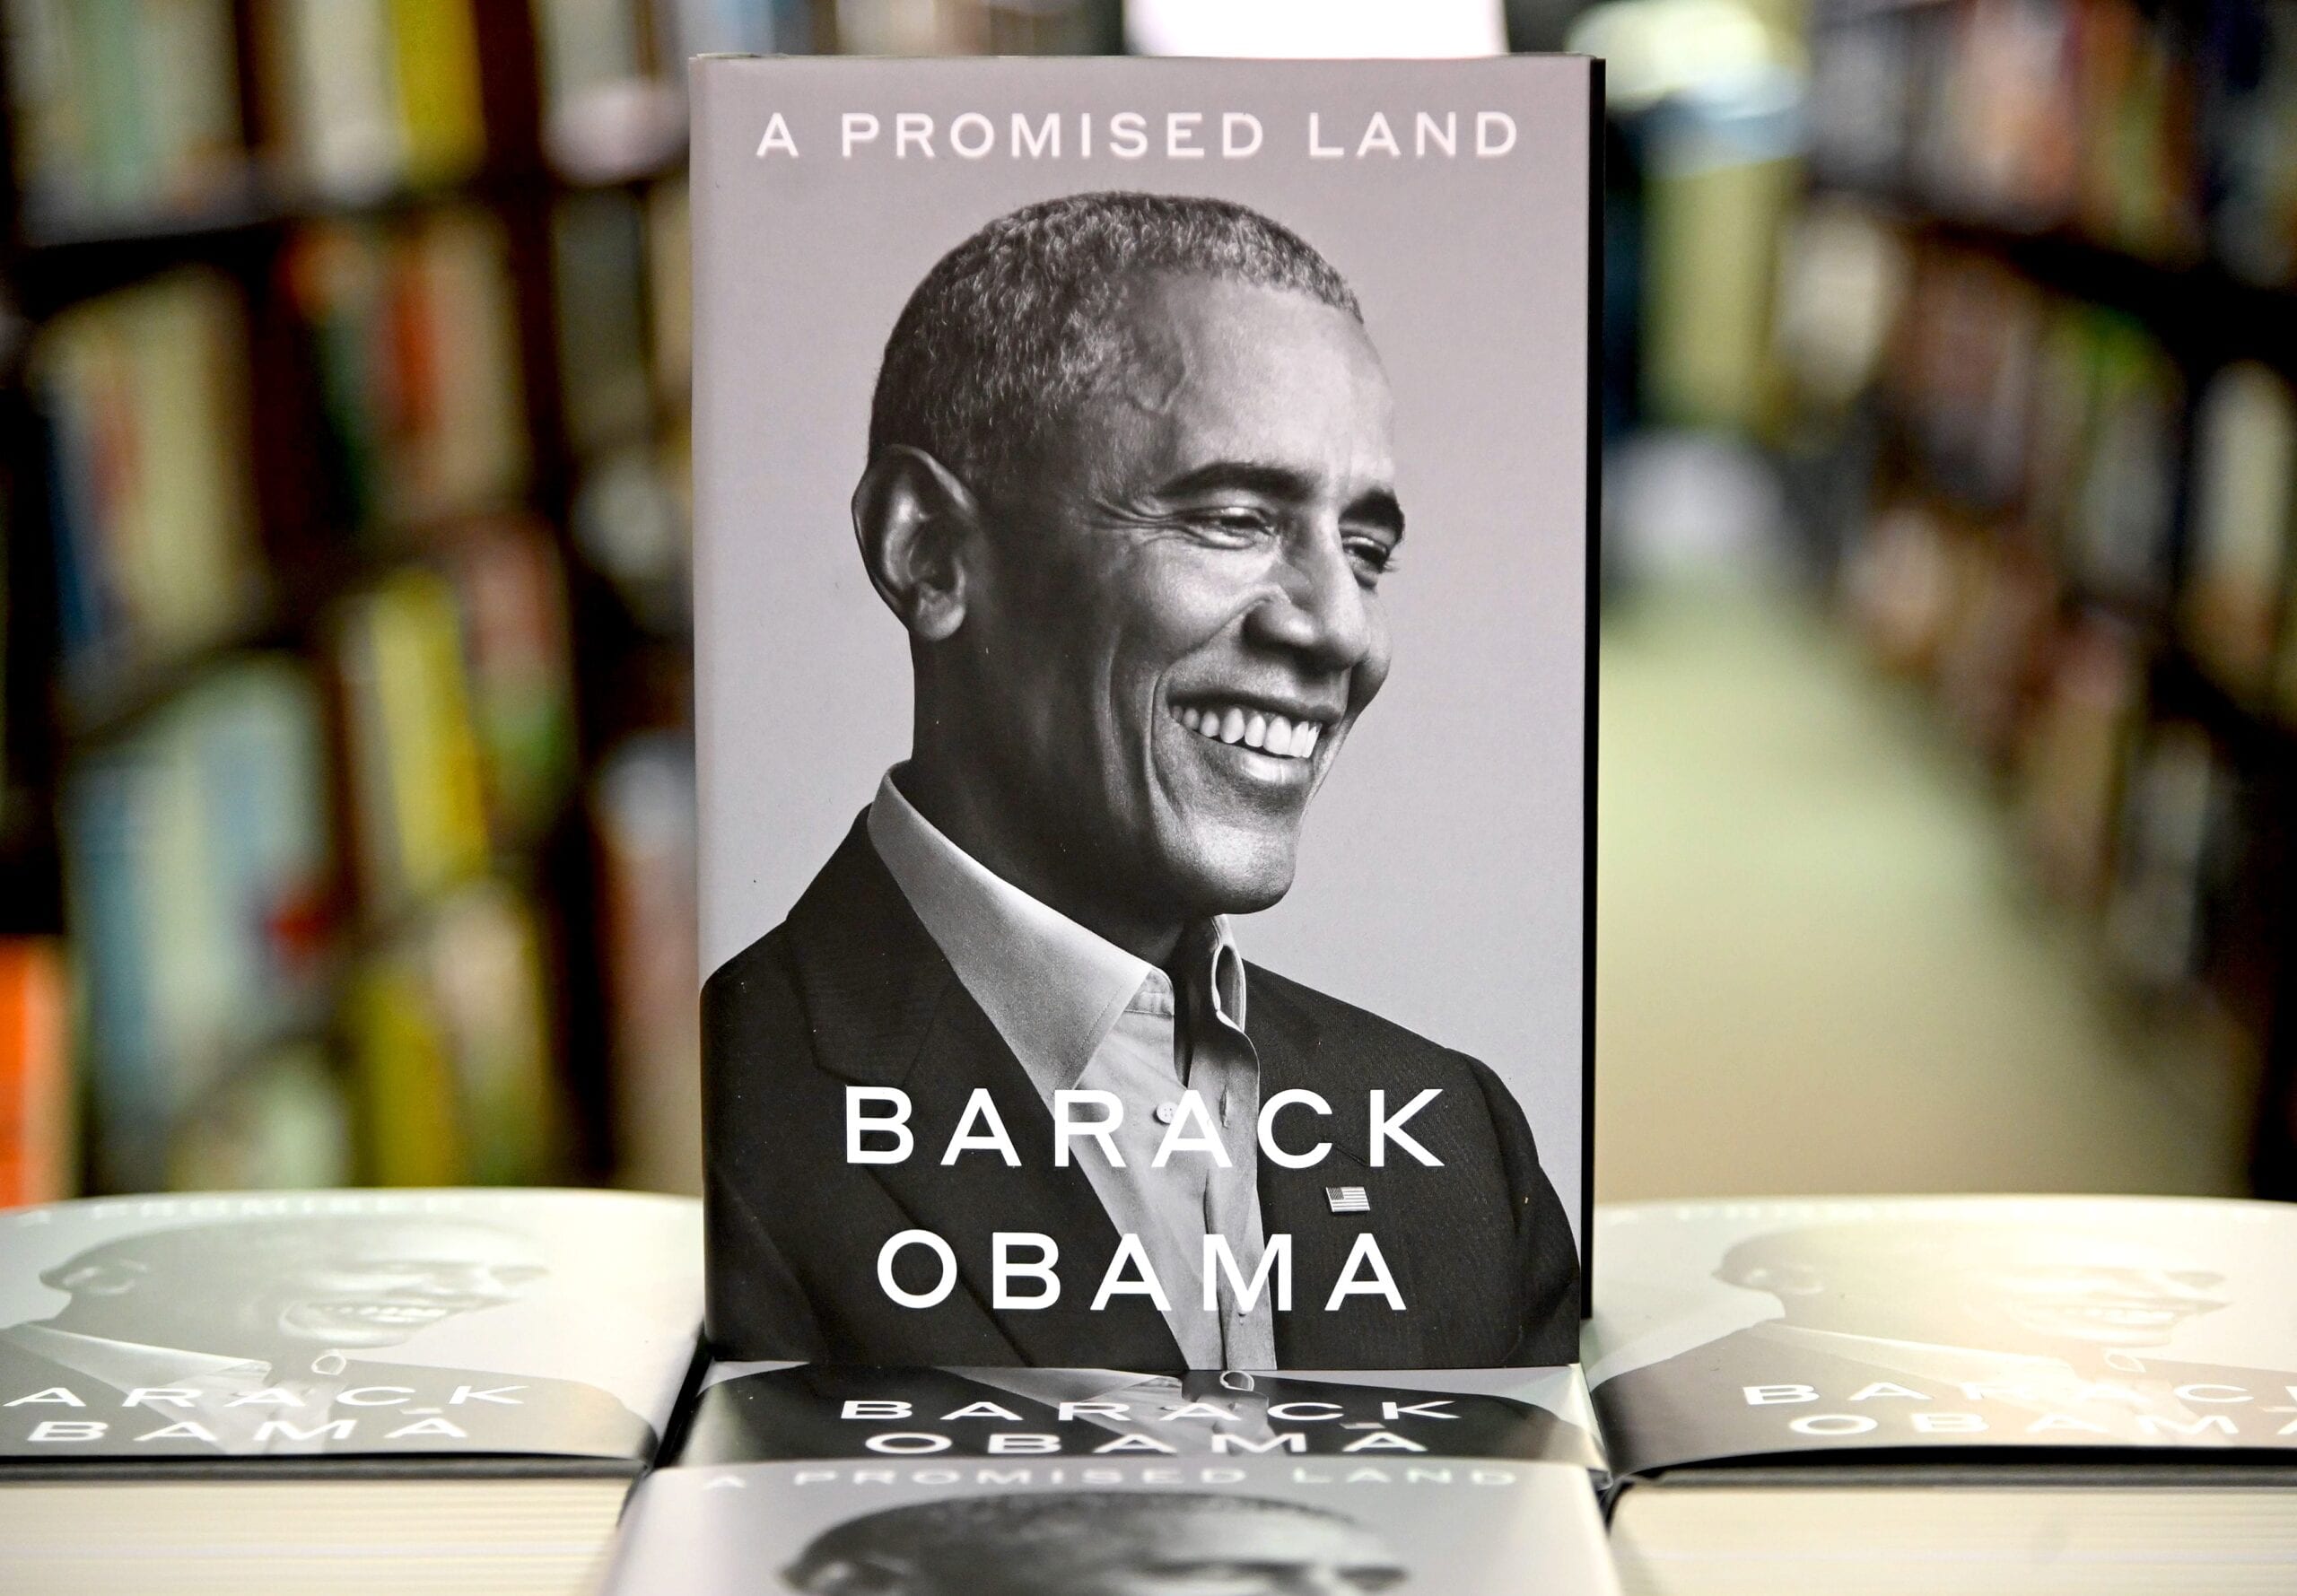 President Barack Obama's memoir 'A Promised Land' at a book store in New York on 17 November 2020 [Jamie McCarthy/Getty Images]